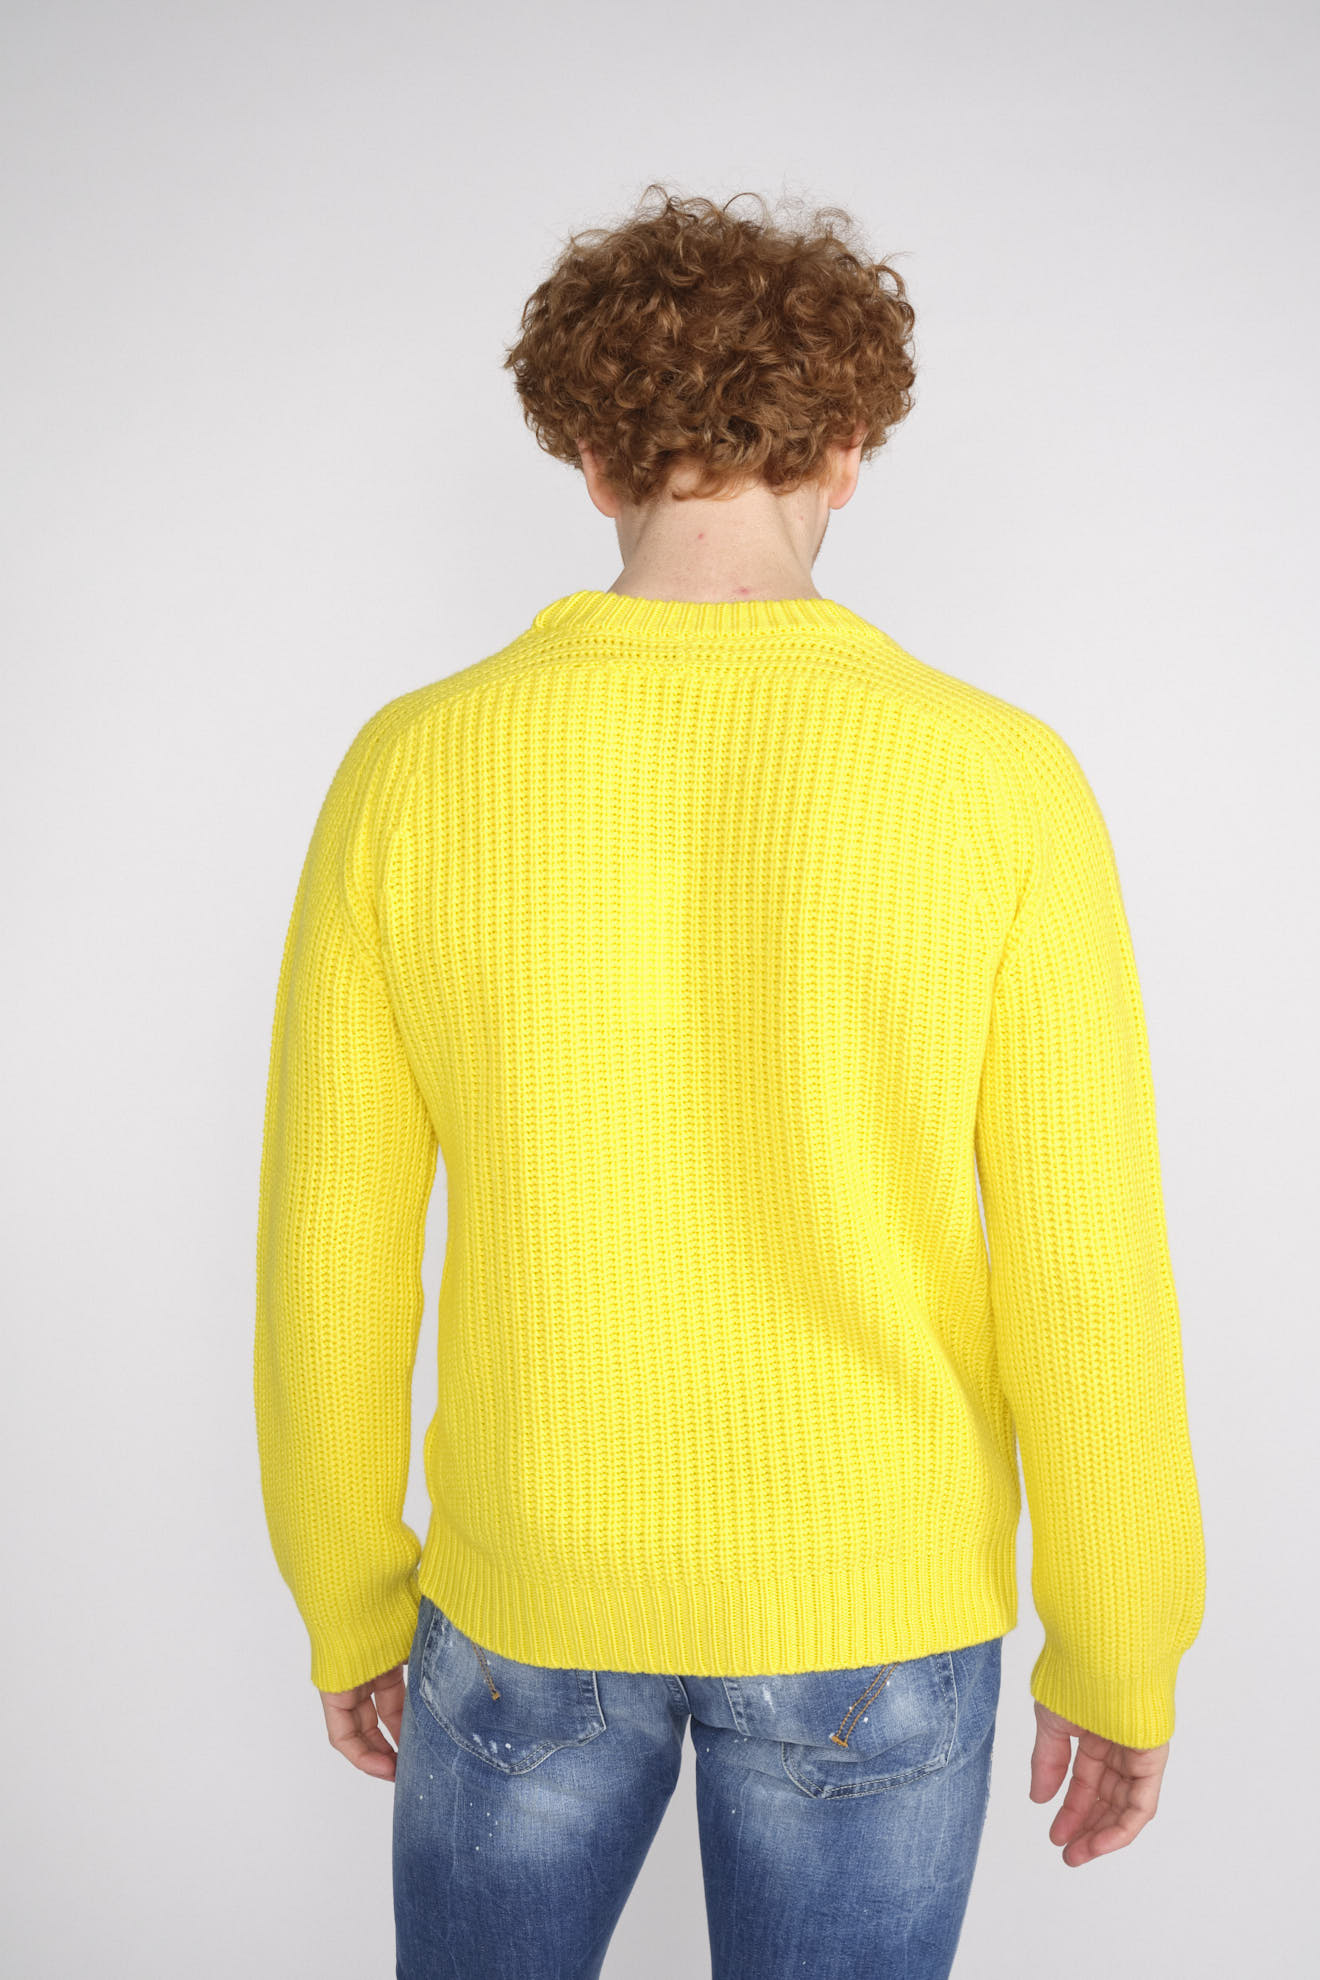 Stephan Boya mood rib - knitted sweater in cashmere yellow M